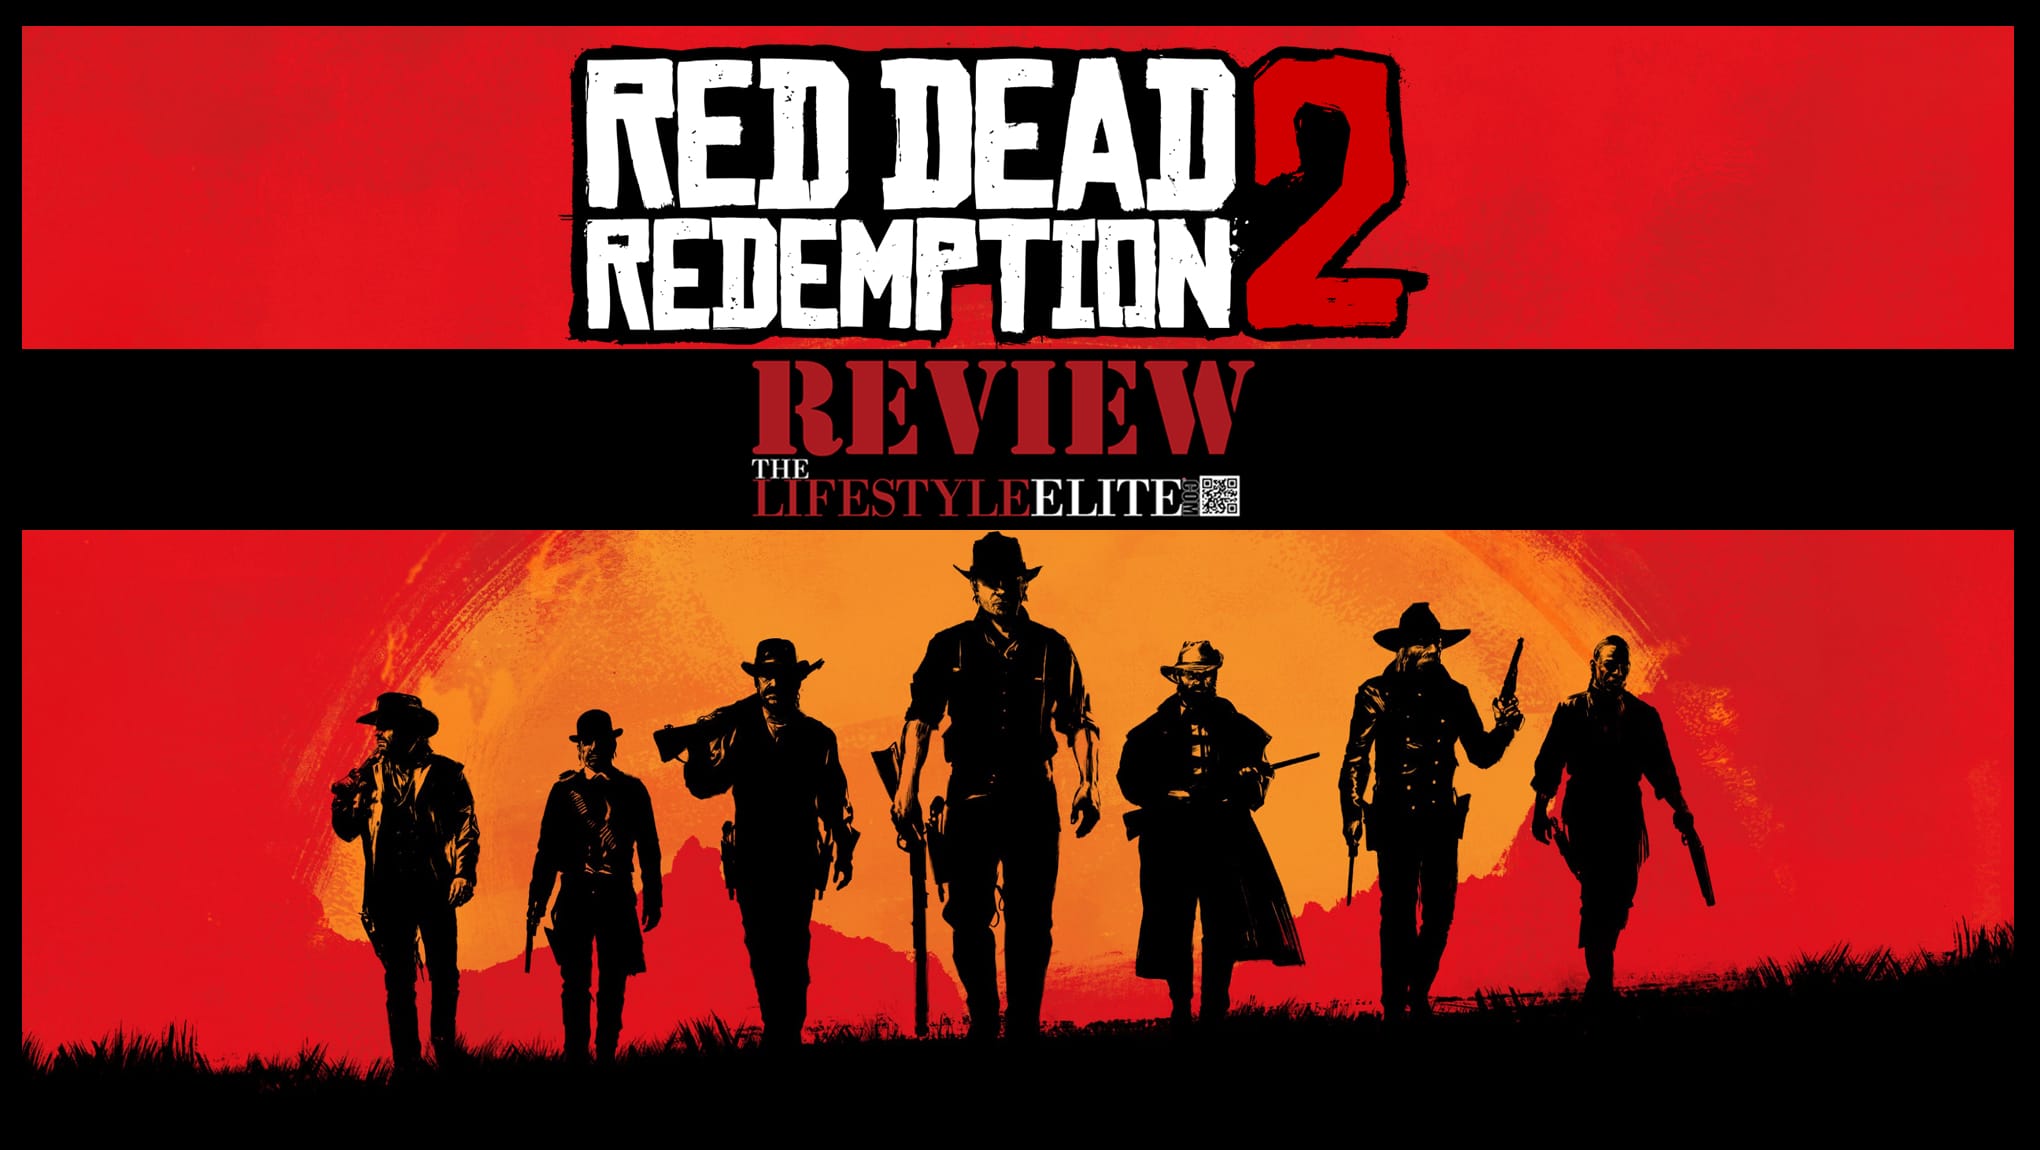 red dead redemption 2 review,,cheyan antwaune gray, cheyan gray, antwaune gray, thelifestyleelite,elite lifestyle, thelifestyleelitedotcom, thelifestyleelite.com,tlselite.com,TheLifeStyleElite.com,cheyan antwaune gray,fashion,models of thelifestyleelite.com, the life style elite,the lifestyle elite,elite lifestyle,lifestyleelite.com,cheyan gray,TLSElite,TLSElite.com,TLSEliteGaming,TLSElite Gaming